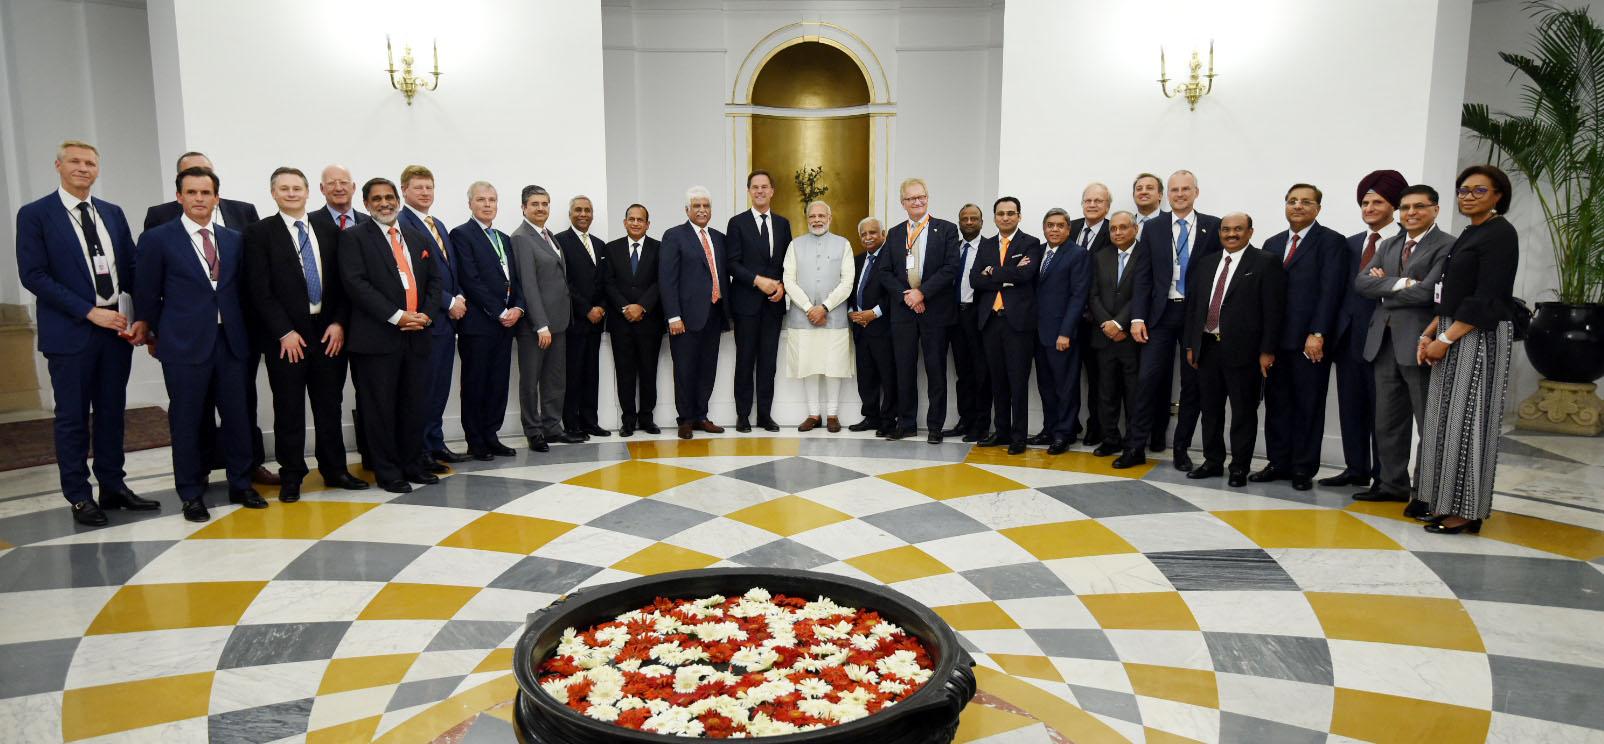 The Prime Minister, Shri Narendra Modi and the Prime Minister of the Kingdom of Netherlands, Mr. Mark Rutte in a group photograph with the CEOs of India and Netherlands, at Hyderabad House, in New Delhi on May 24, 2018.